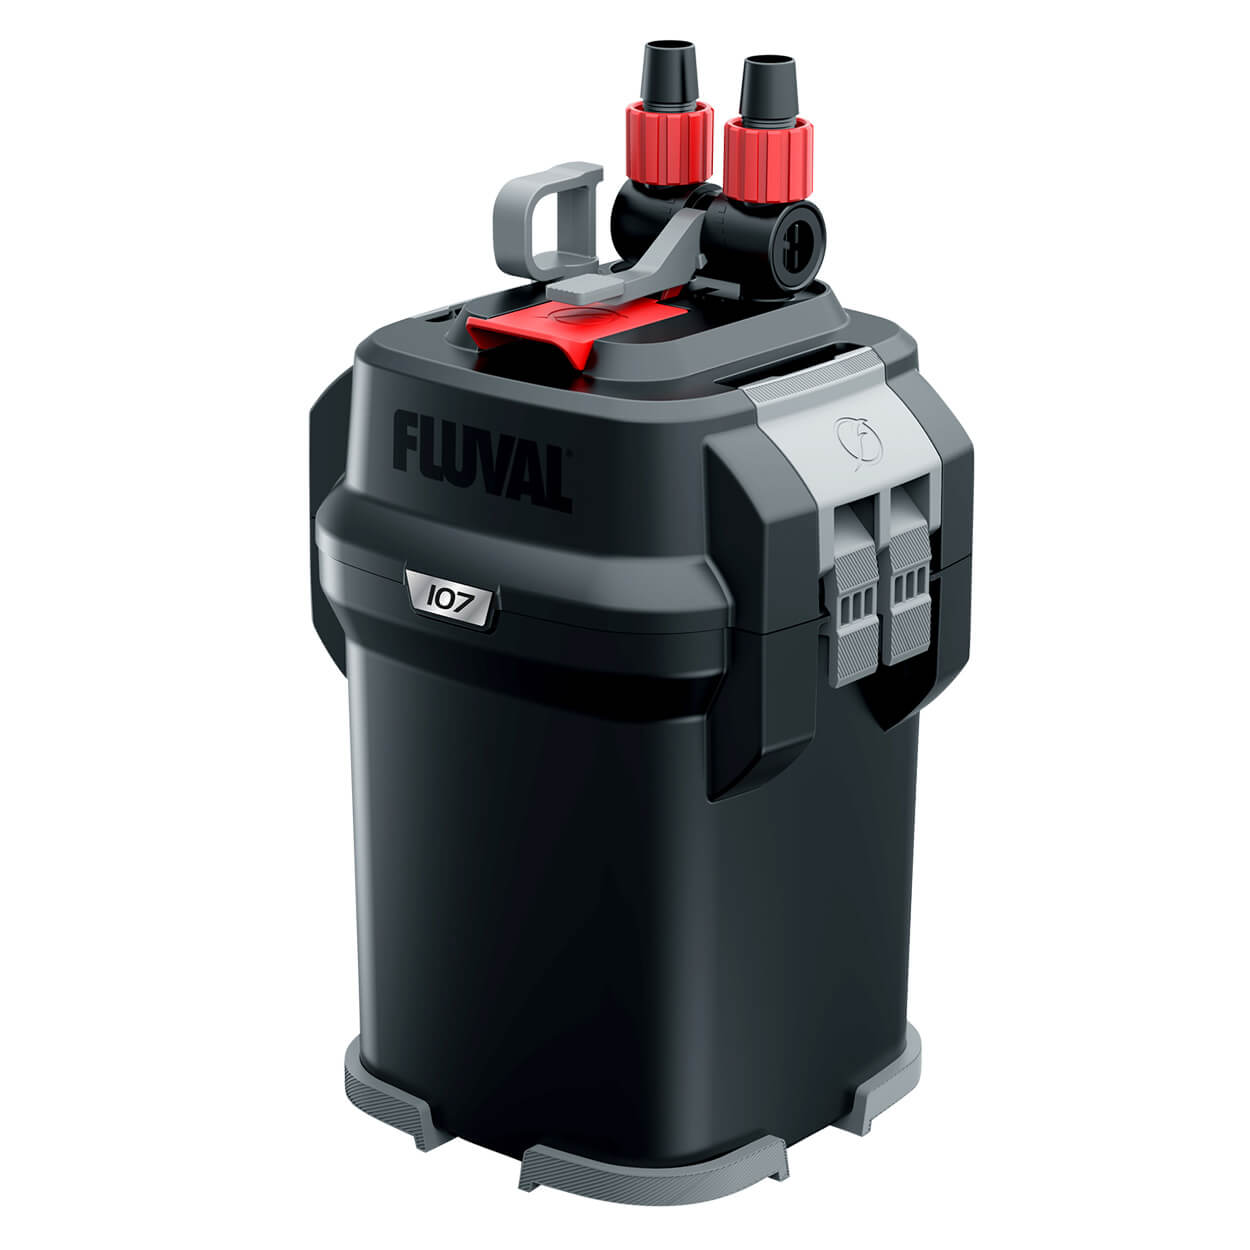 Image of a Fluval Canister Filter